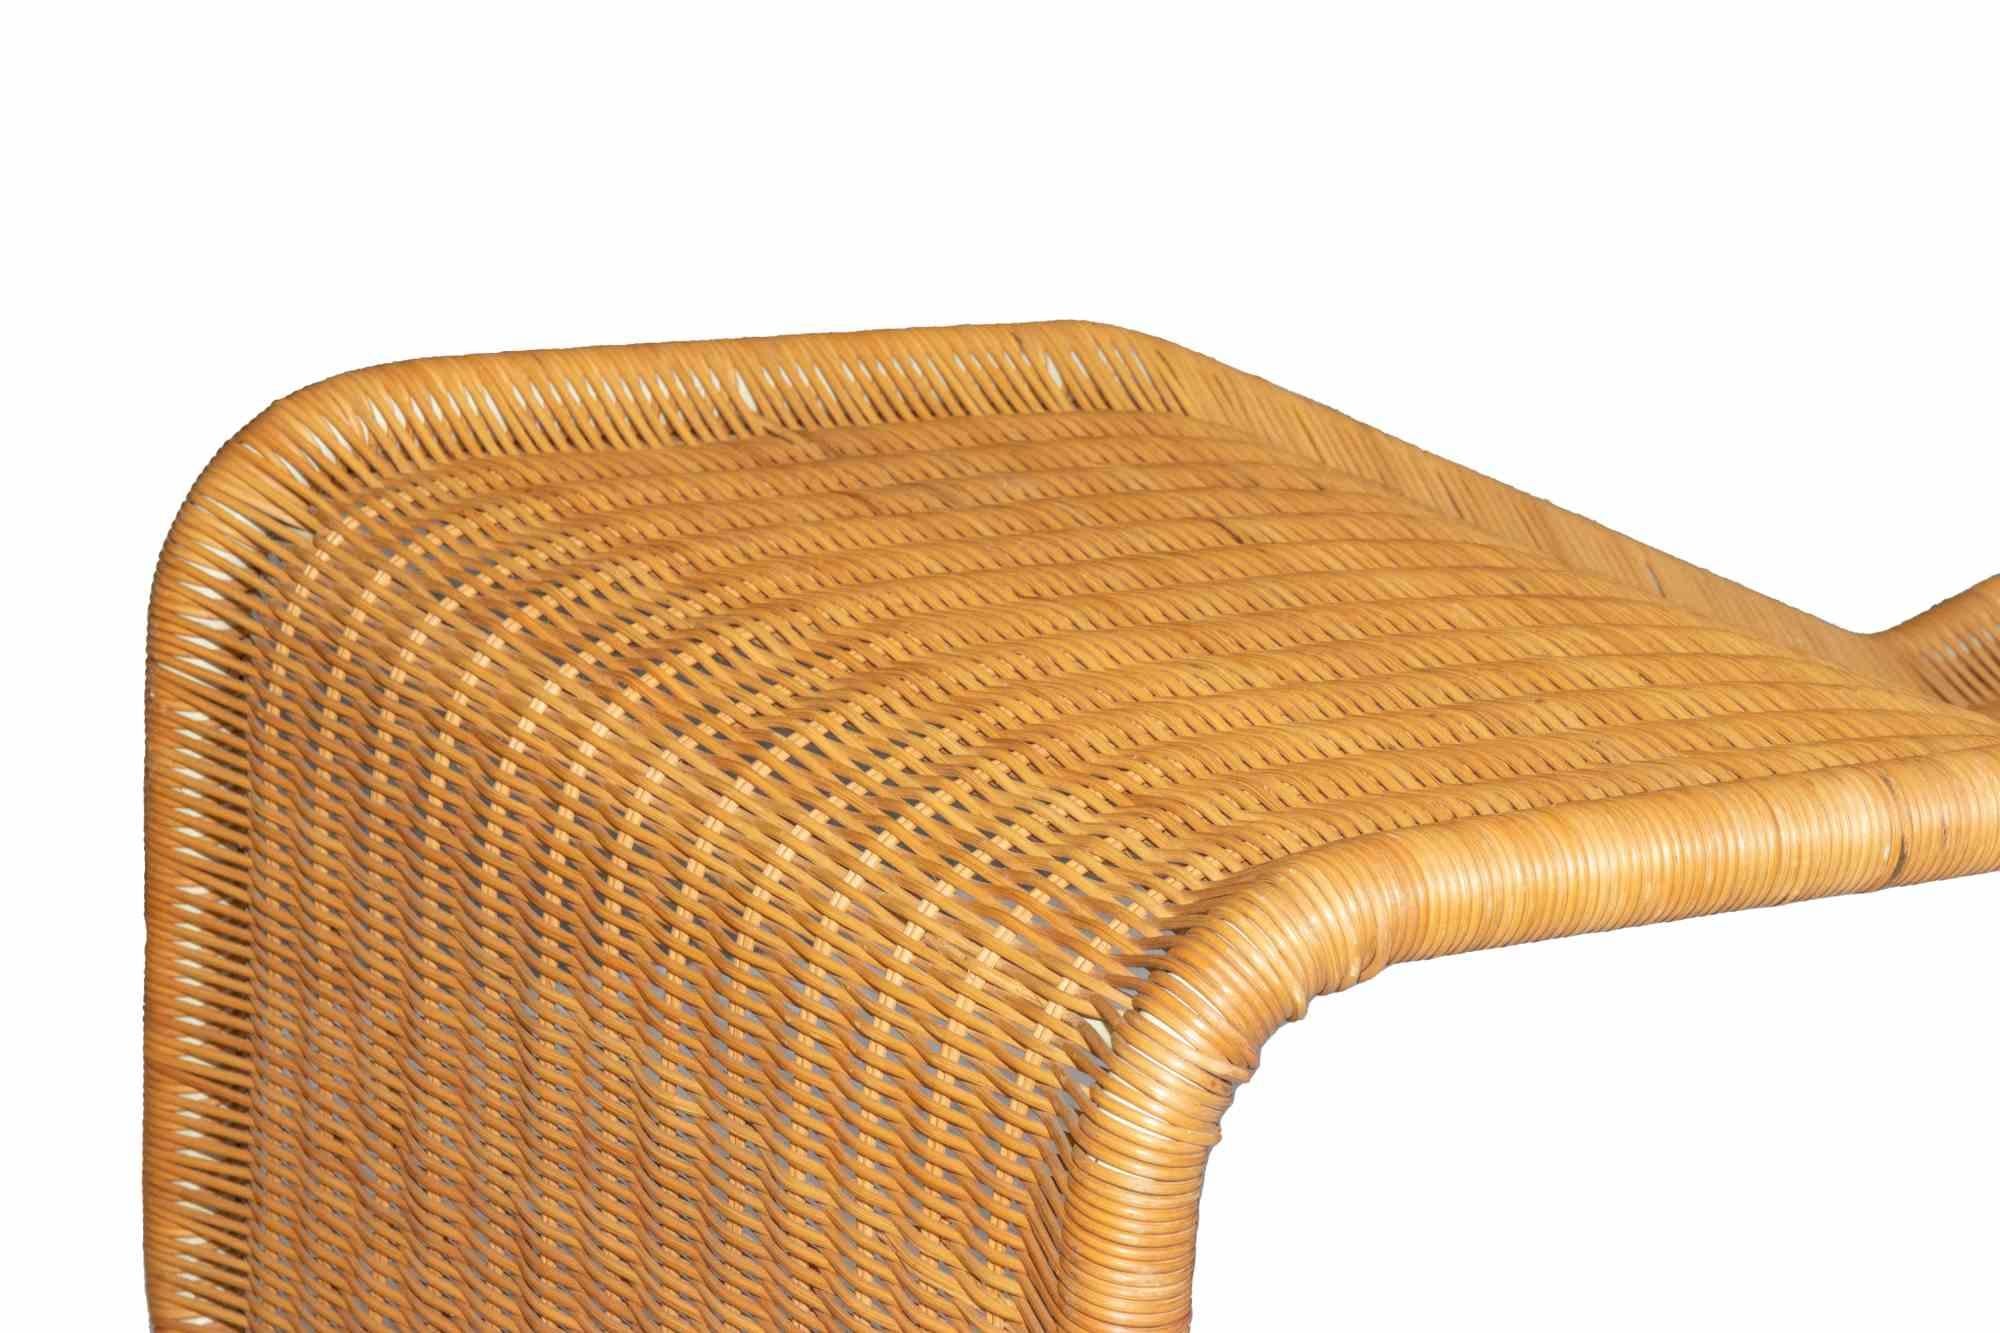 Chaise Longue is an original decorative design furniture realized by Tito Agnoli in 1962.

Rare example of P3S rattan chaise longue designed by Tito Agnoli for Bonacina in the 60s.

The metal structure is entirely made of woven rattan.

Don't miss